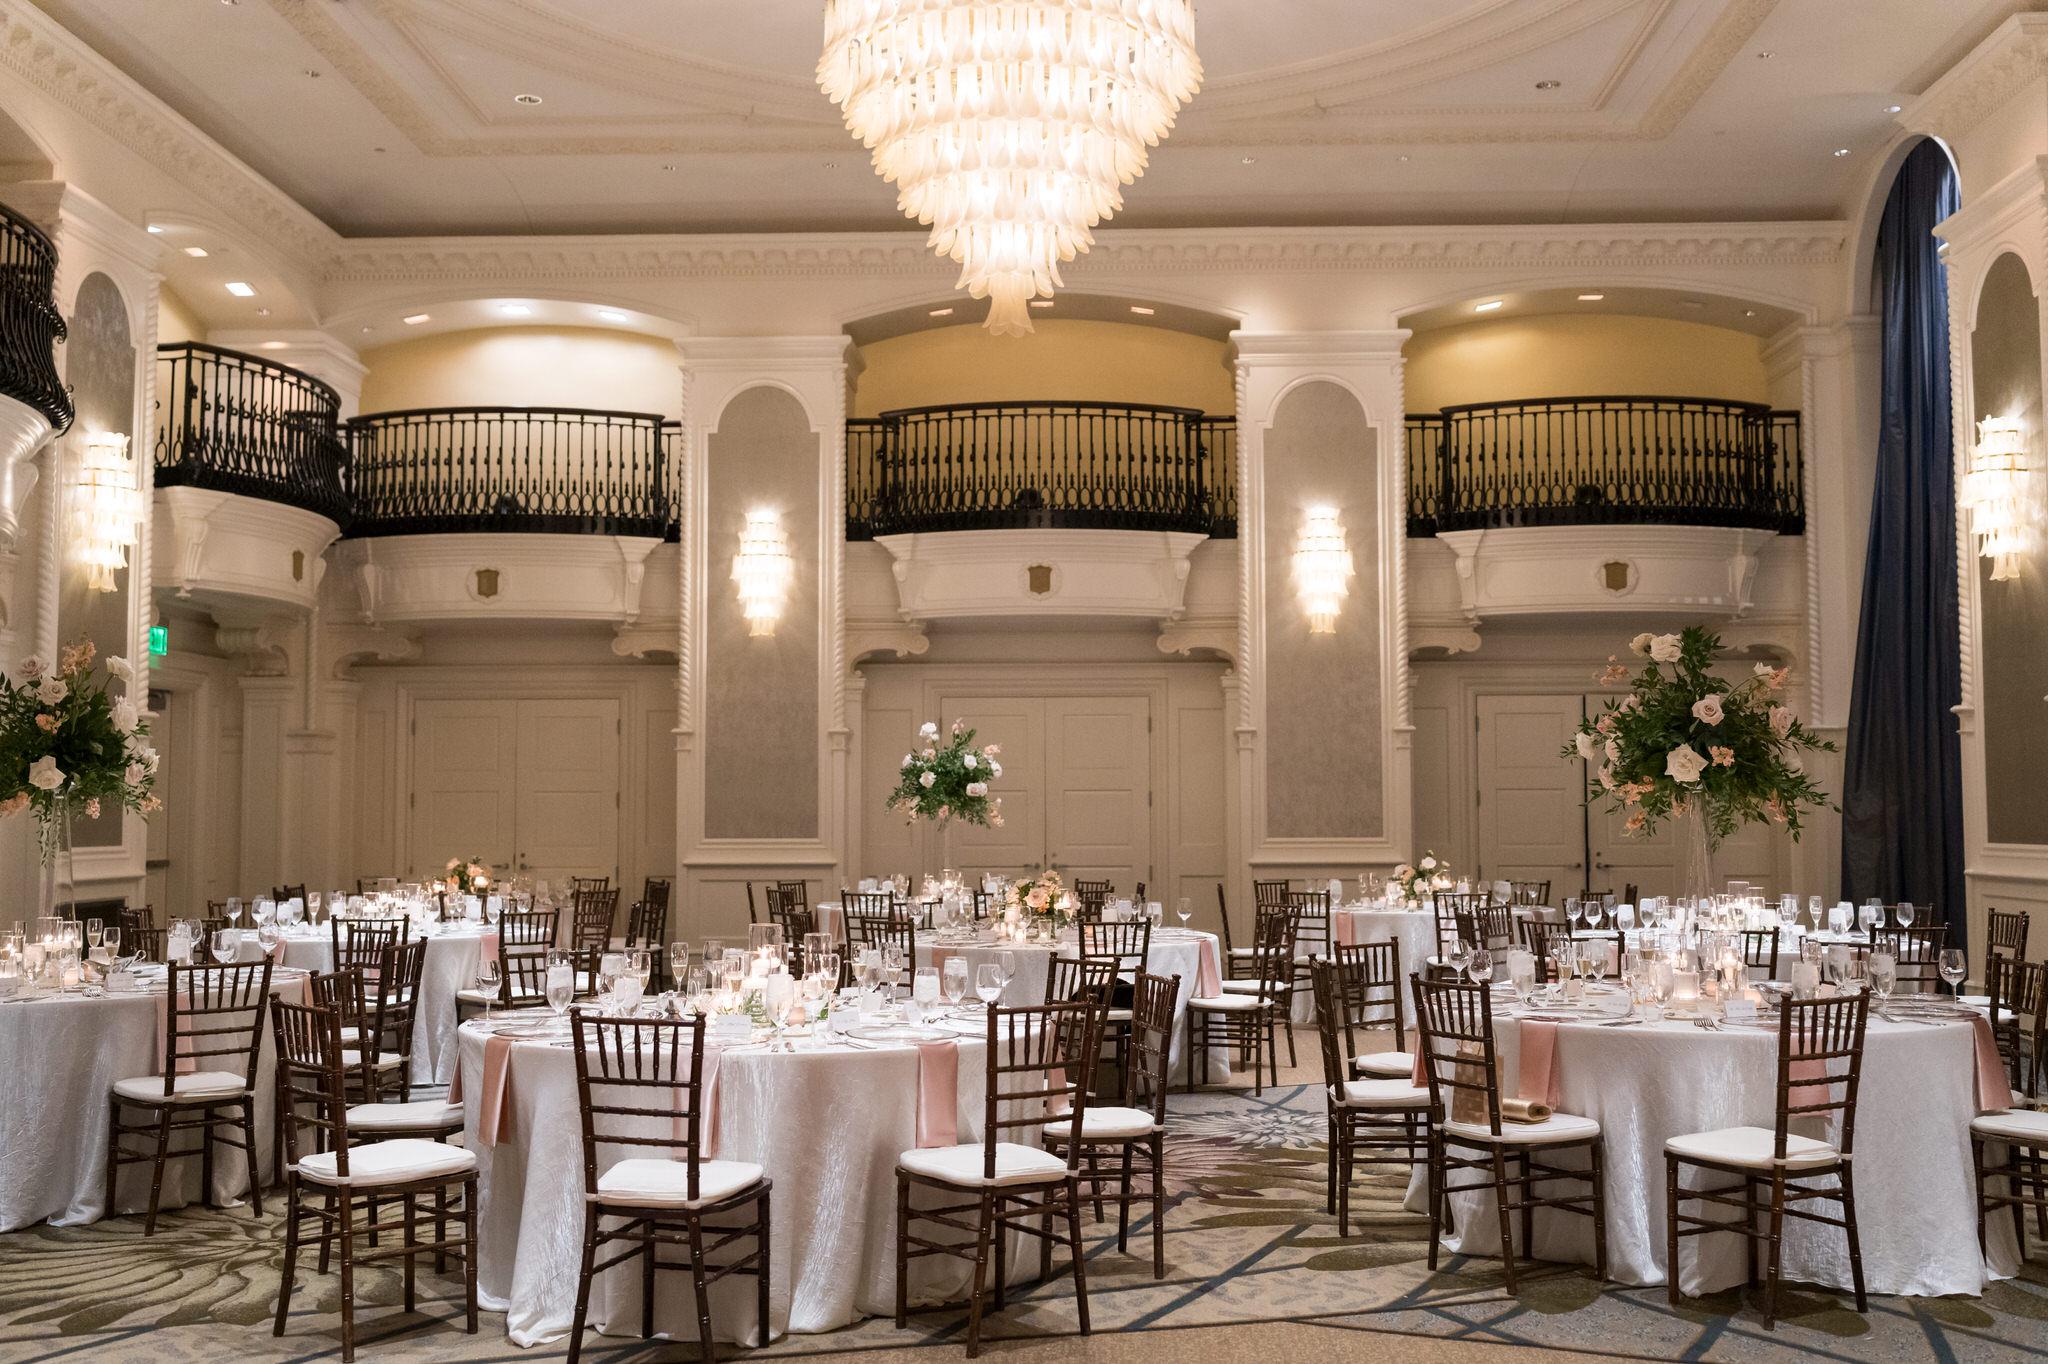 A gorgeous, decorated ballroom from Emerald City Designs at a Westin Book Cadillac wedding reception.  